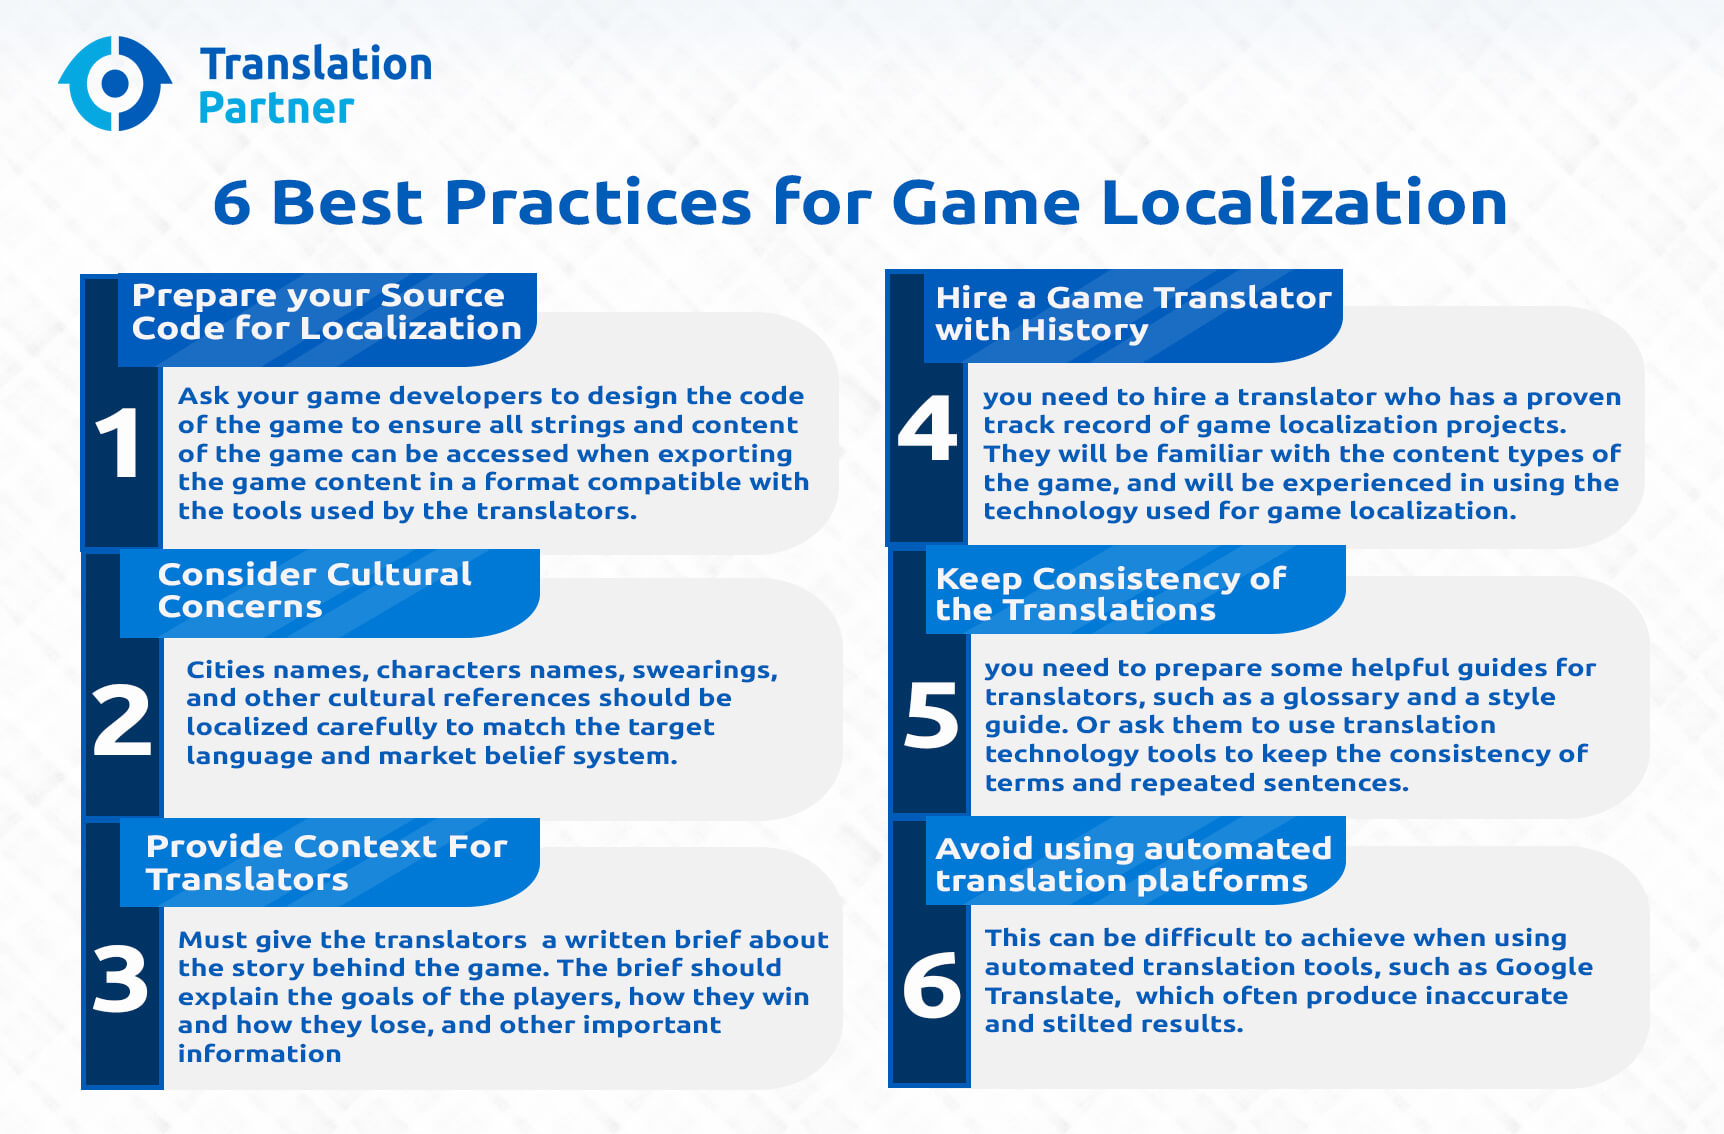 6 Best Practices for Game Localization infograph